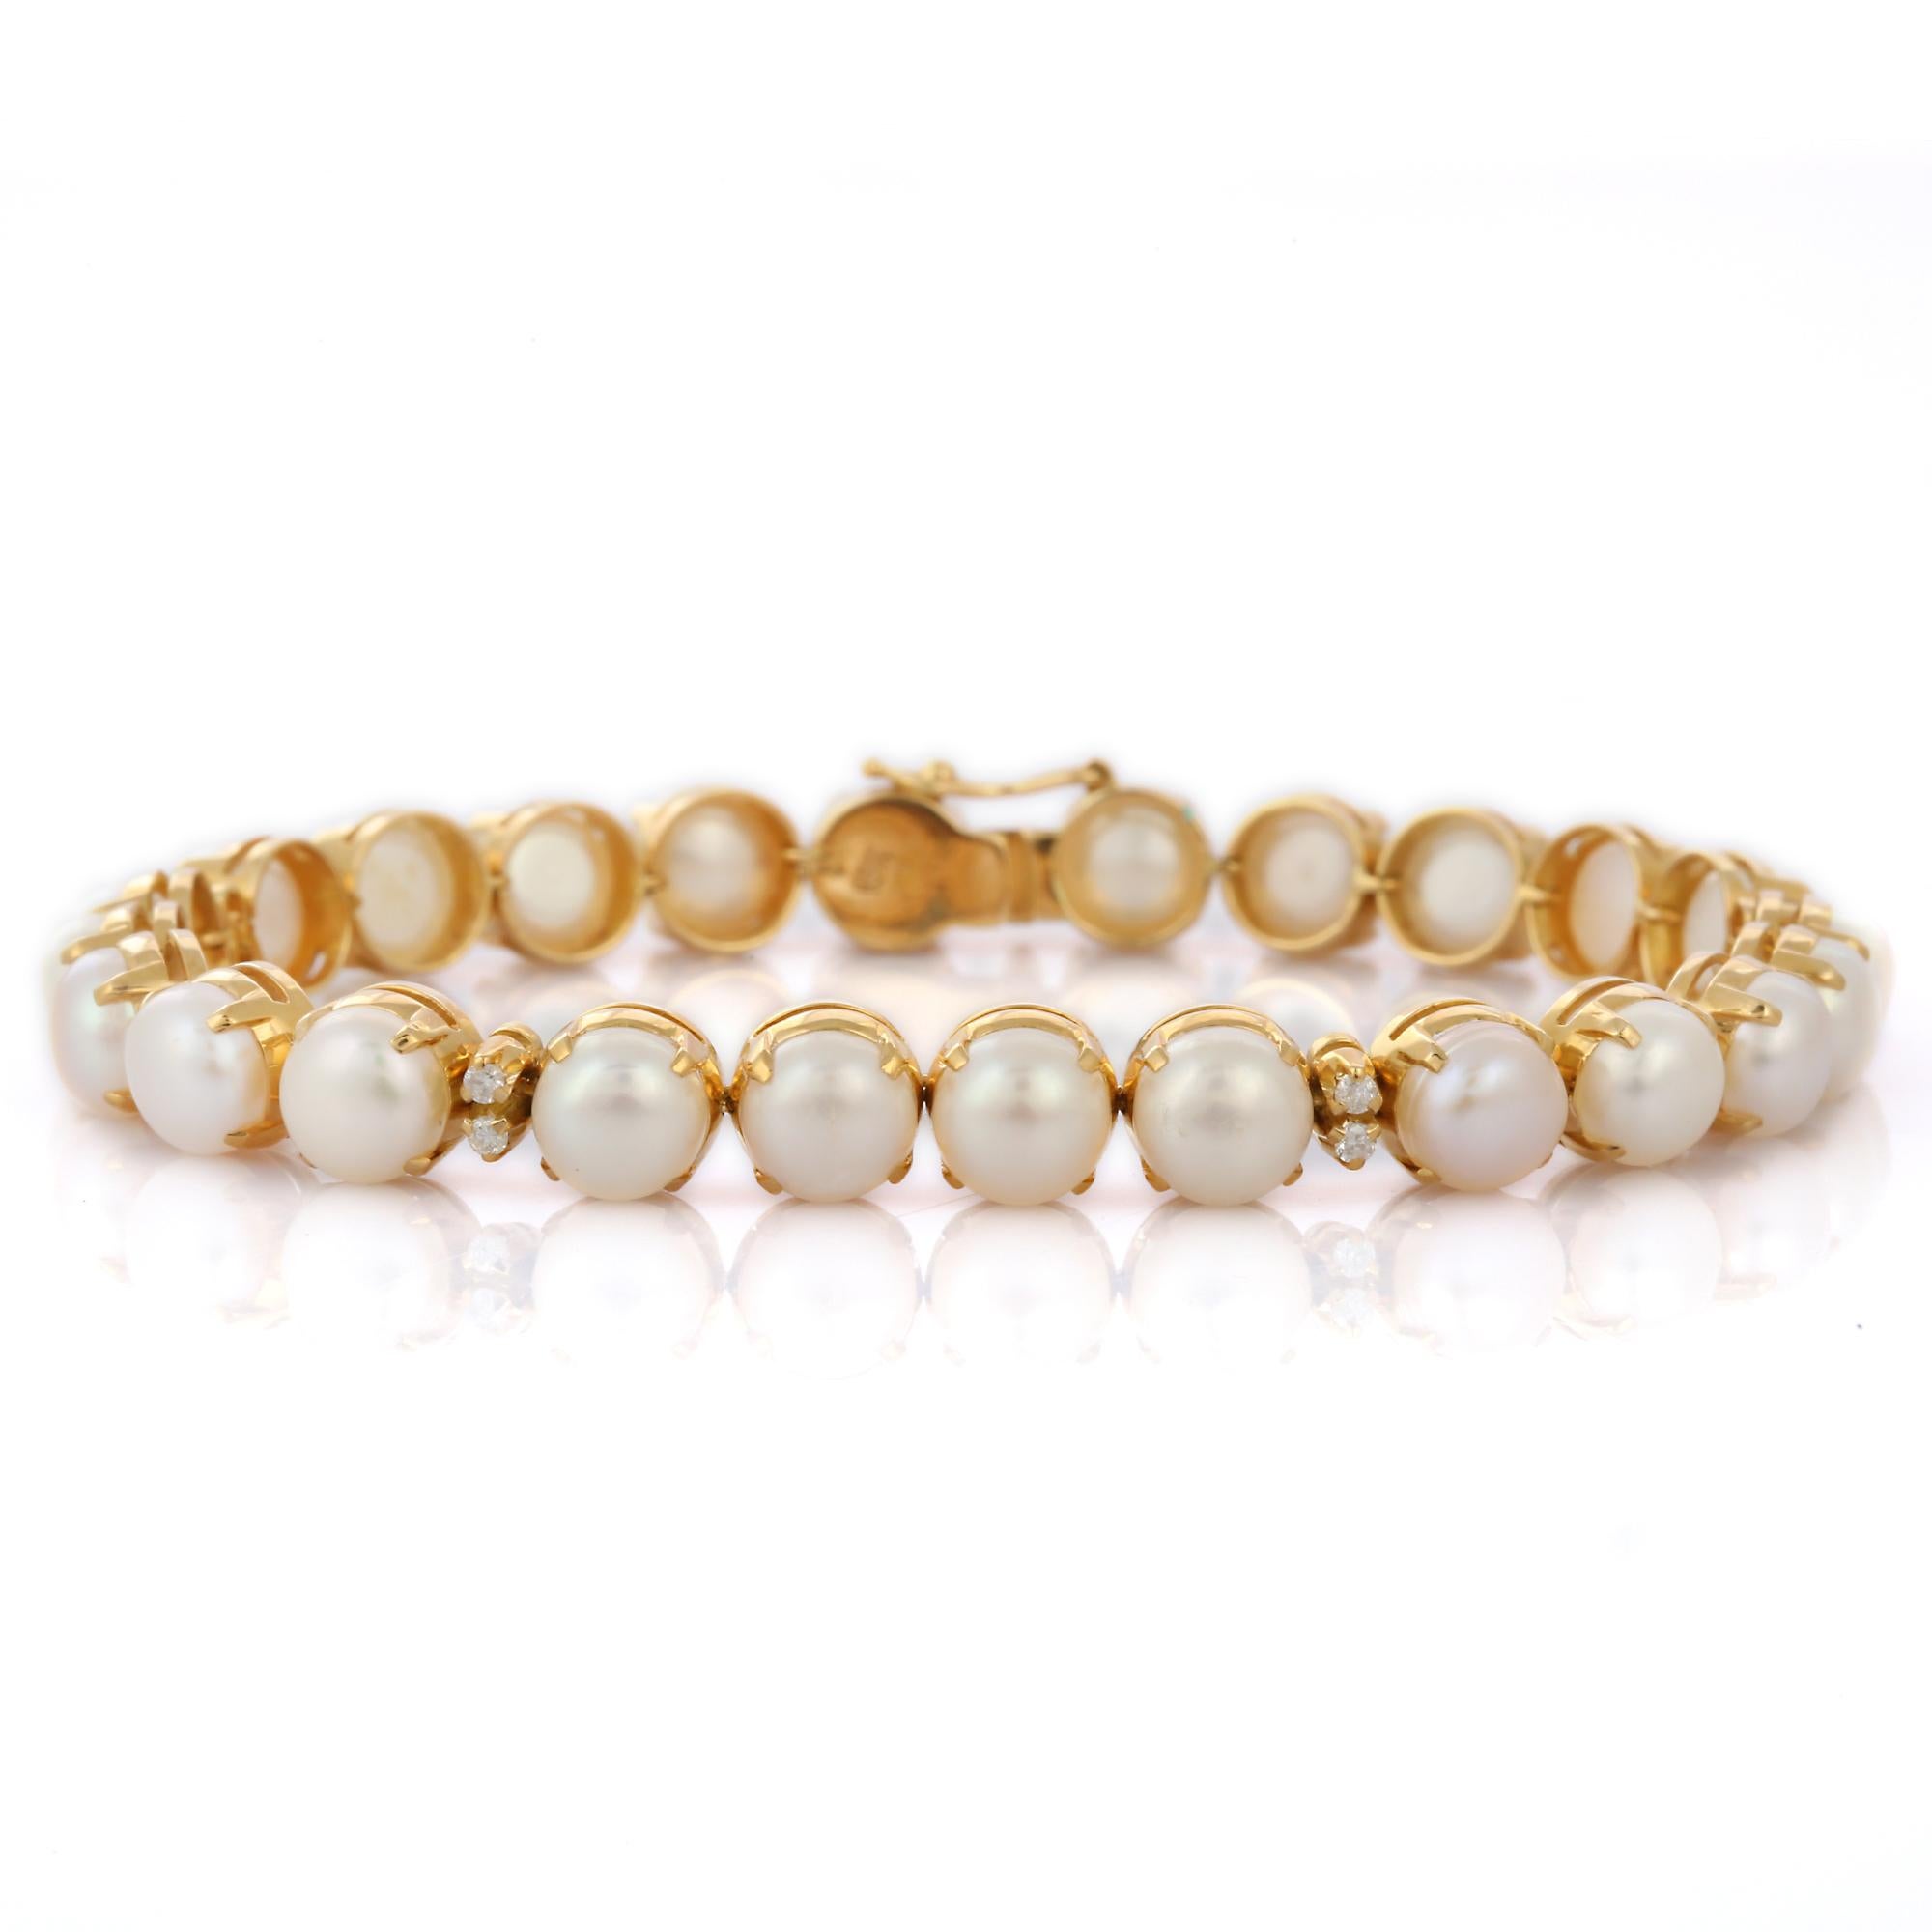 Pearl and Diamond bracelet in 18K Gold. It has a perfect round cut gemstone to make you stand out on any occasion or an event. 
A tennis bracelet is an essential piece of jewelry when it comes to your wedding day. The sleek and elegant style